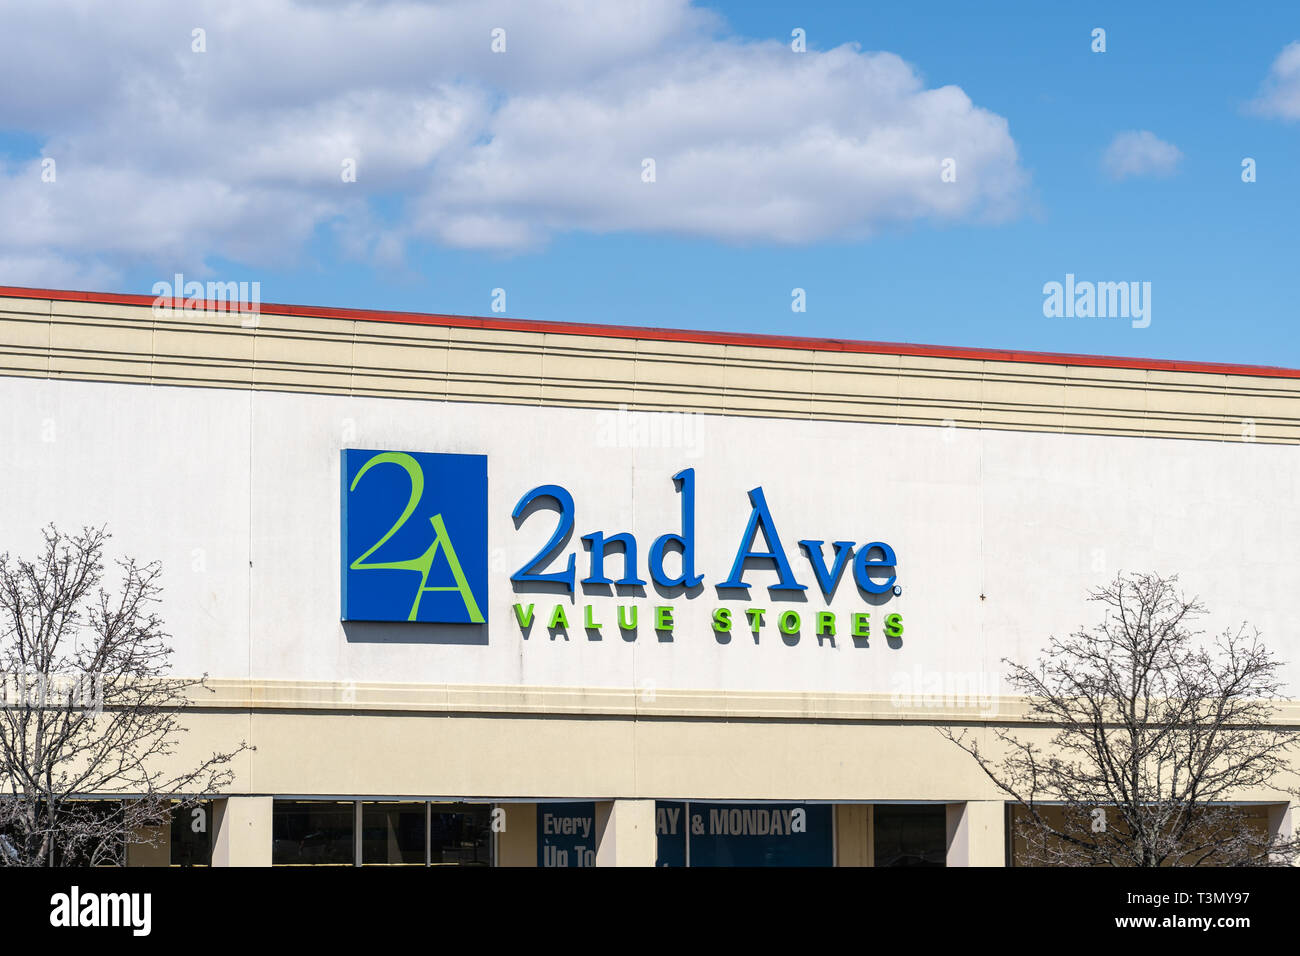 North Wales, PA - March 19, 2019: 2nd Ave Value Stores is a thrift store chain that sells high quality second hand goods which they purchase from char Stock Photo